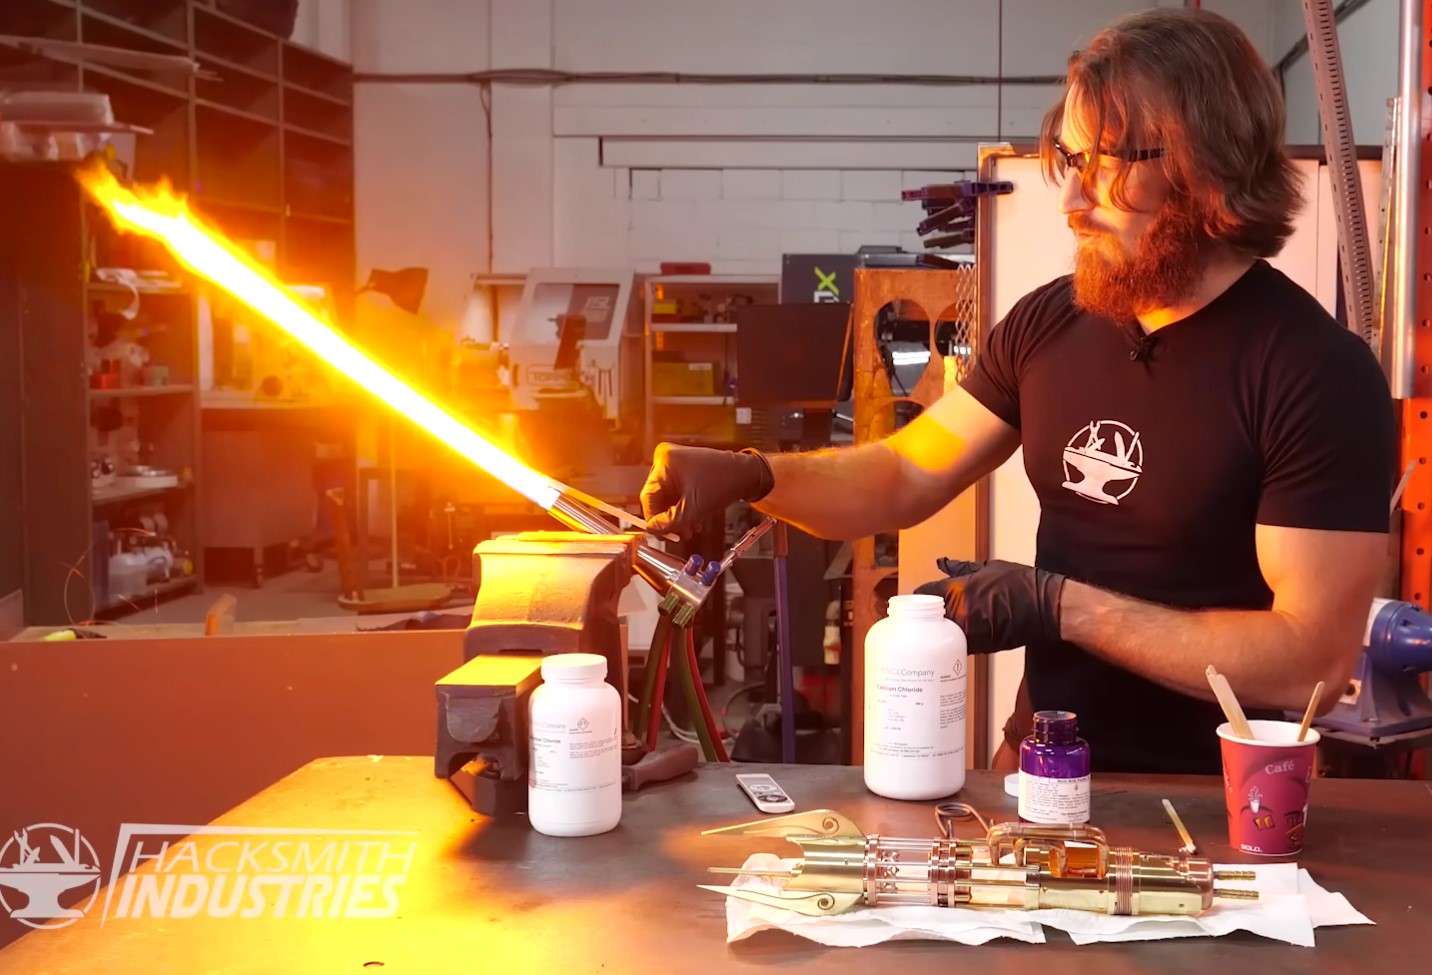 Man left people stunned after showing off 'world's first lightsaber' cutting through metal 6